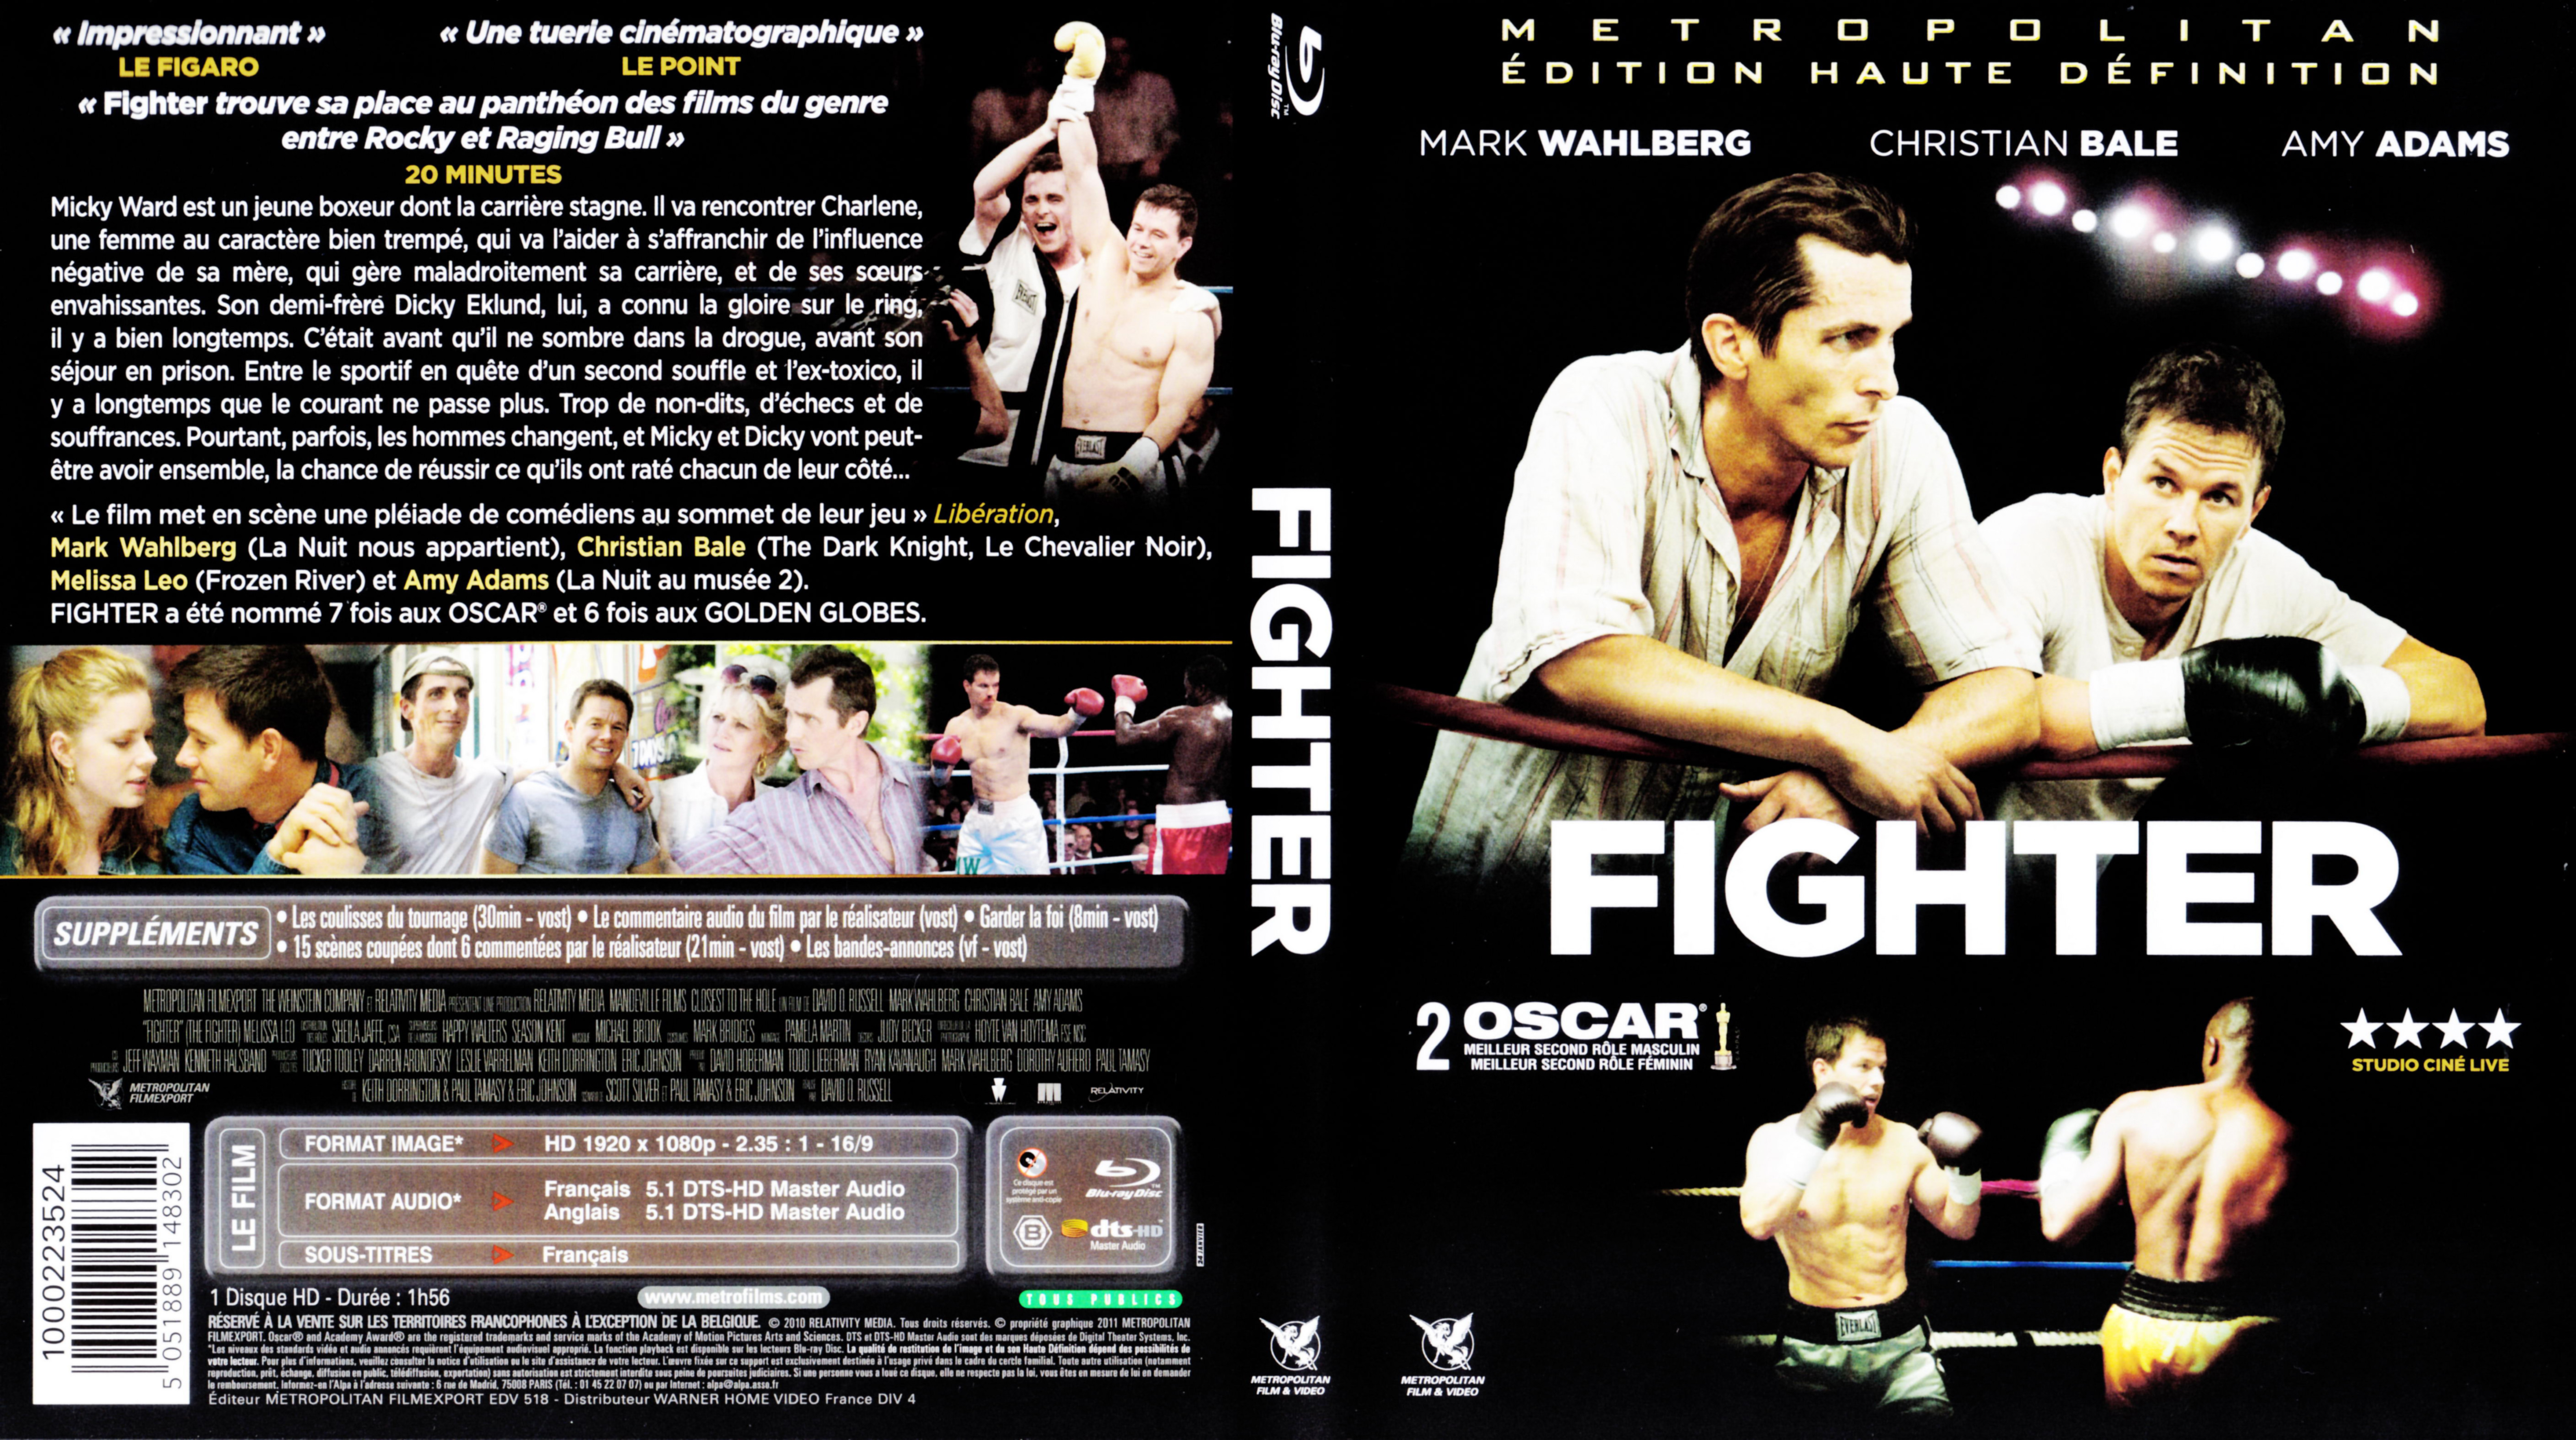 Jaquette DVD Fighter (BLU-RAY)